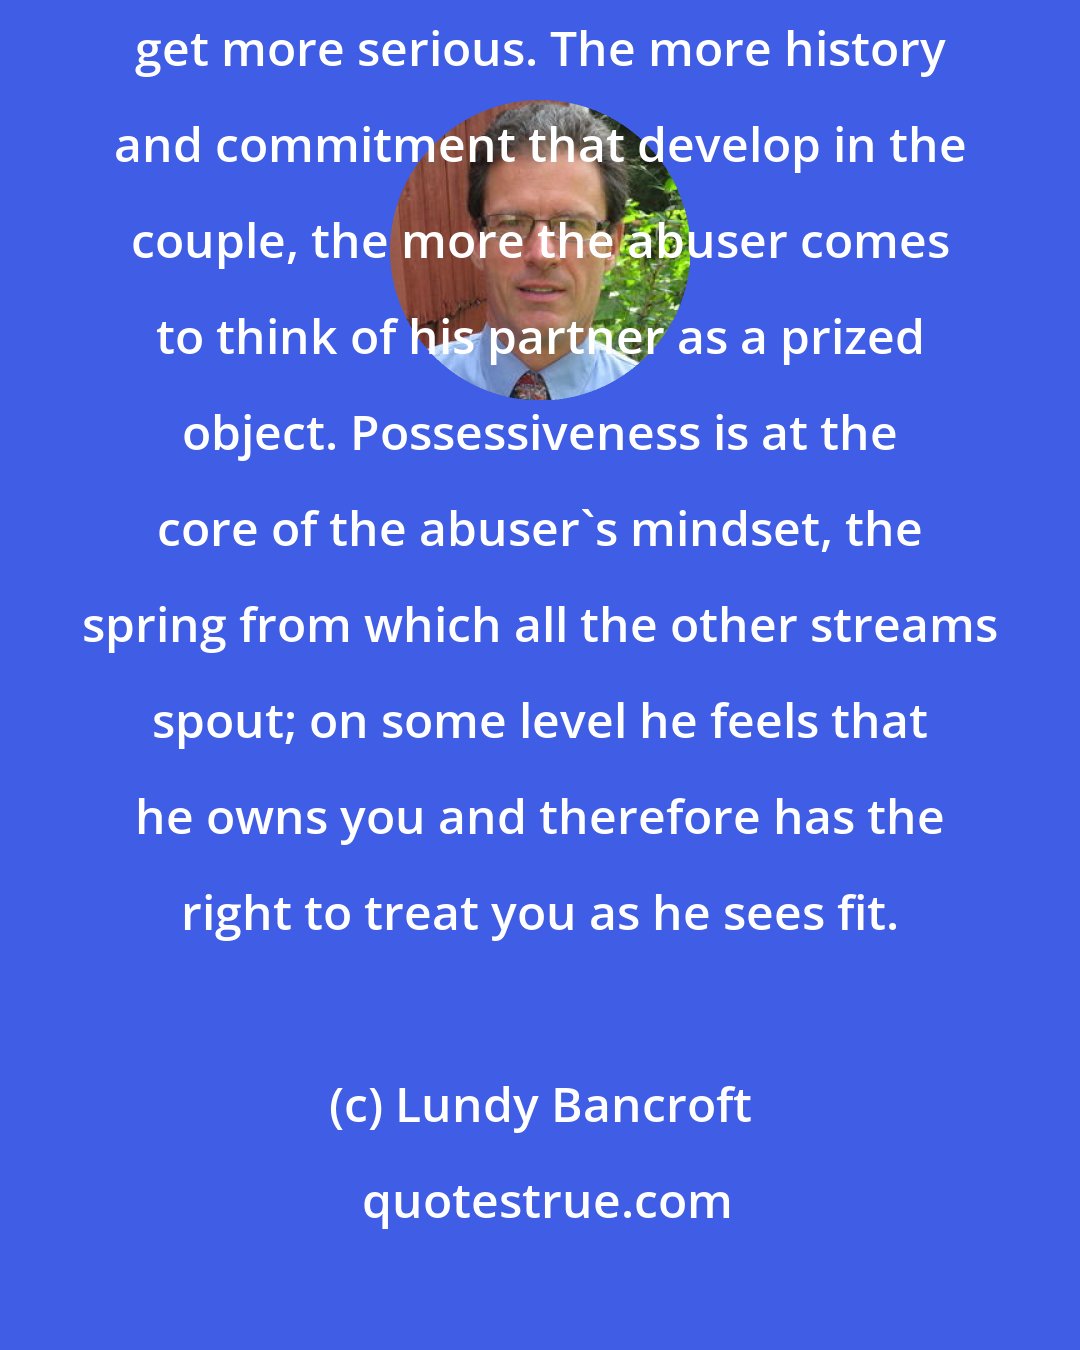 Lundy Bancroft: The sense of ownership is one reason why abuse tends to get worse as relationships get more serious. The more history and commitment that develop in the couple, the more the abuser comes to think of his partner as a prized object. Possessiveness is at the core of the abuser's mindset, the spring from which all the other streams spout; on some level he feels that he owns you and therefore has the right to treat you as he sees fit.